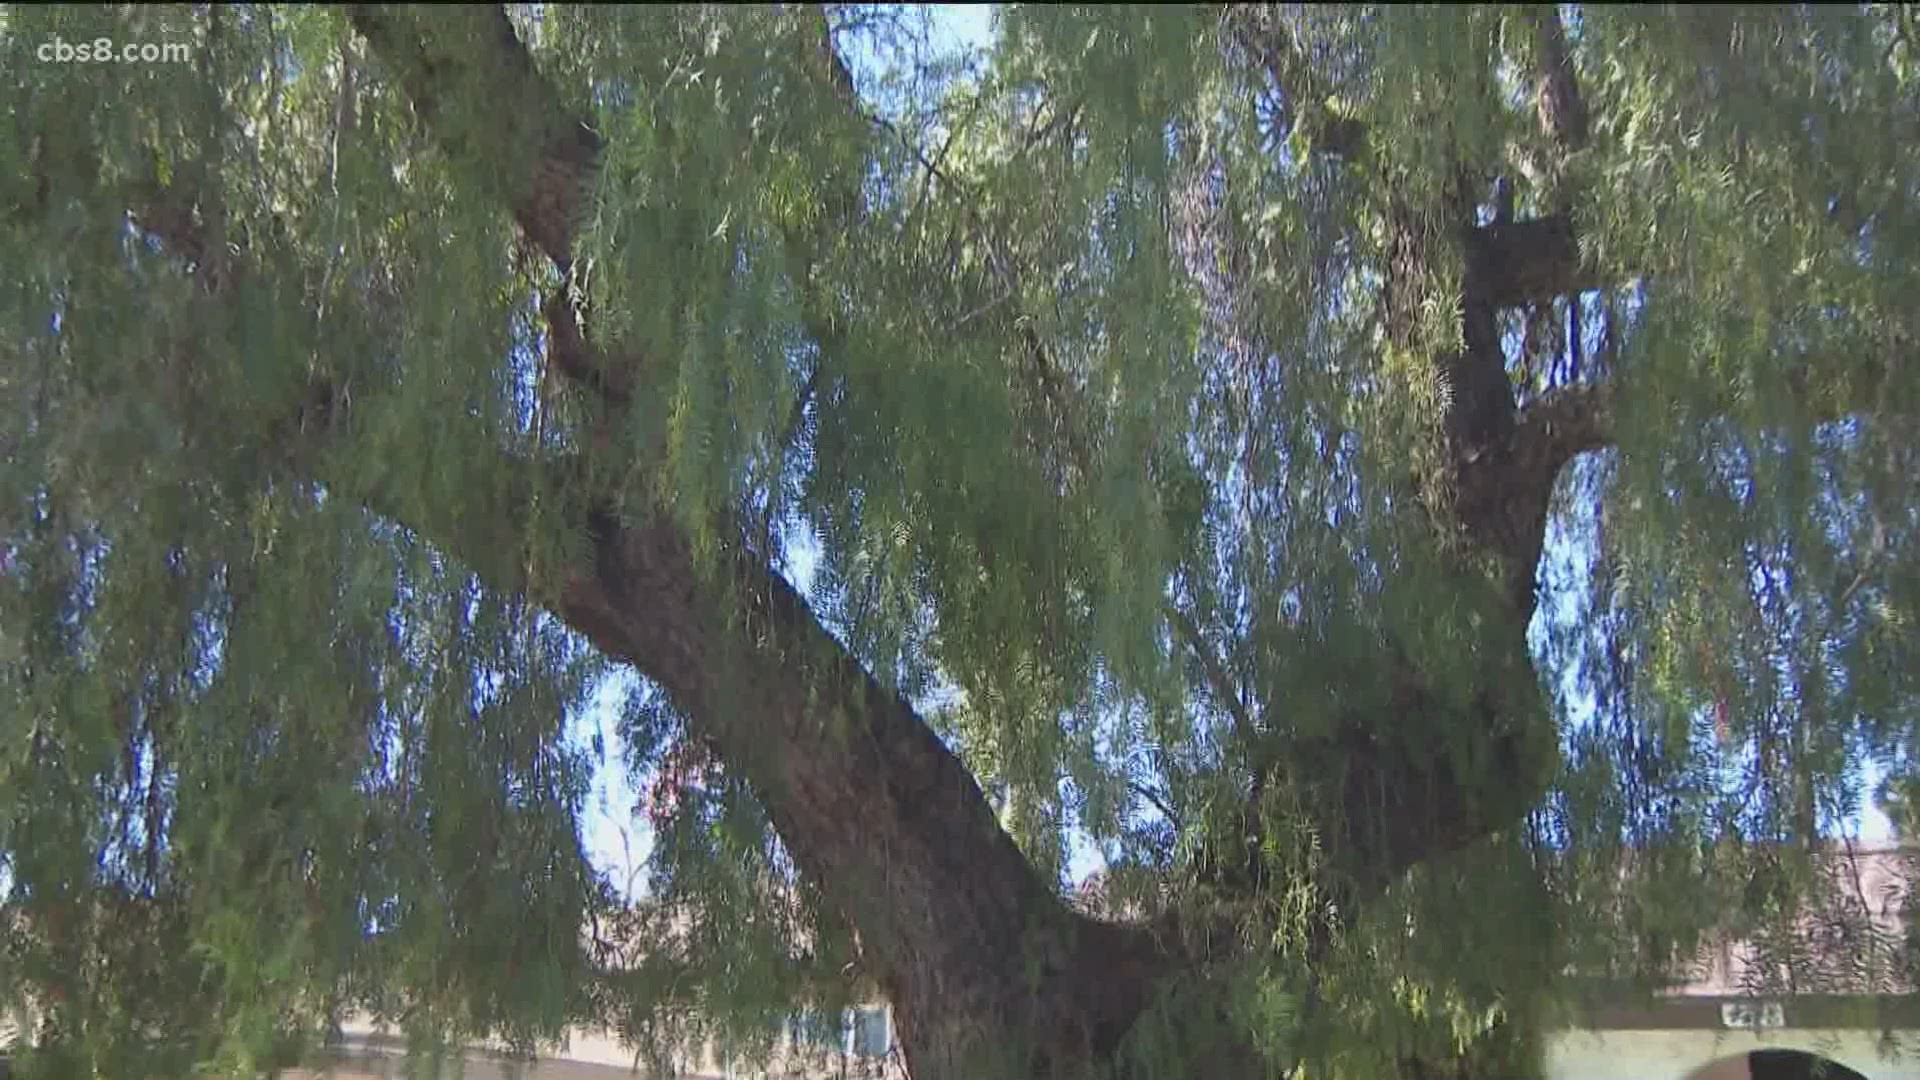 Residents in the San Diego neighborhood believe that the trees are healthy and have never had an issue with losing branches.